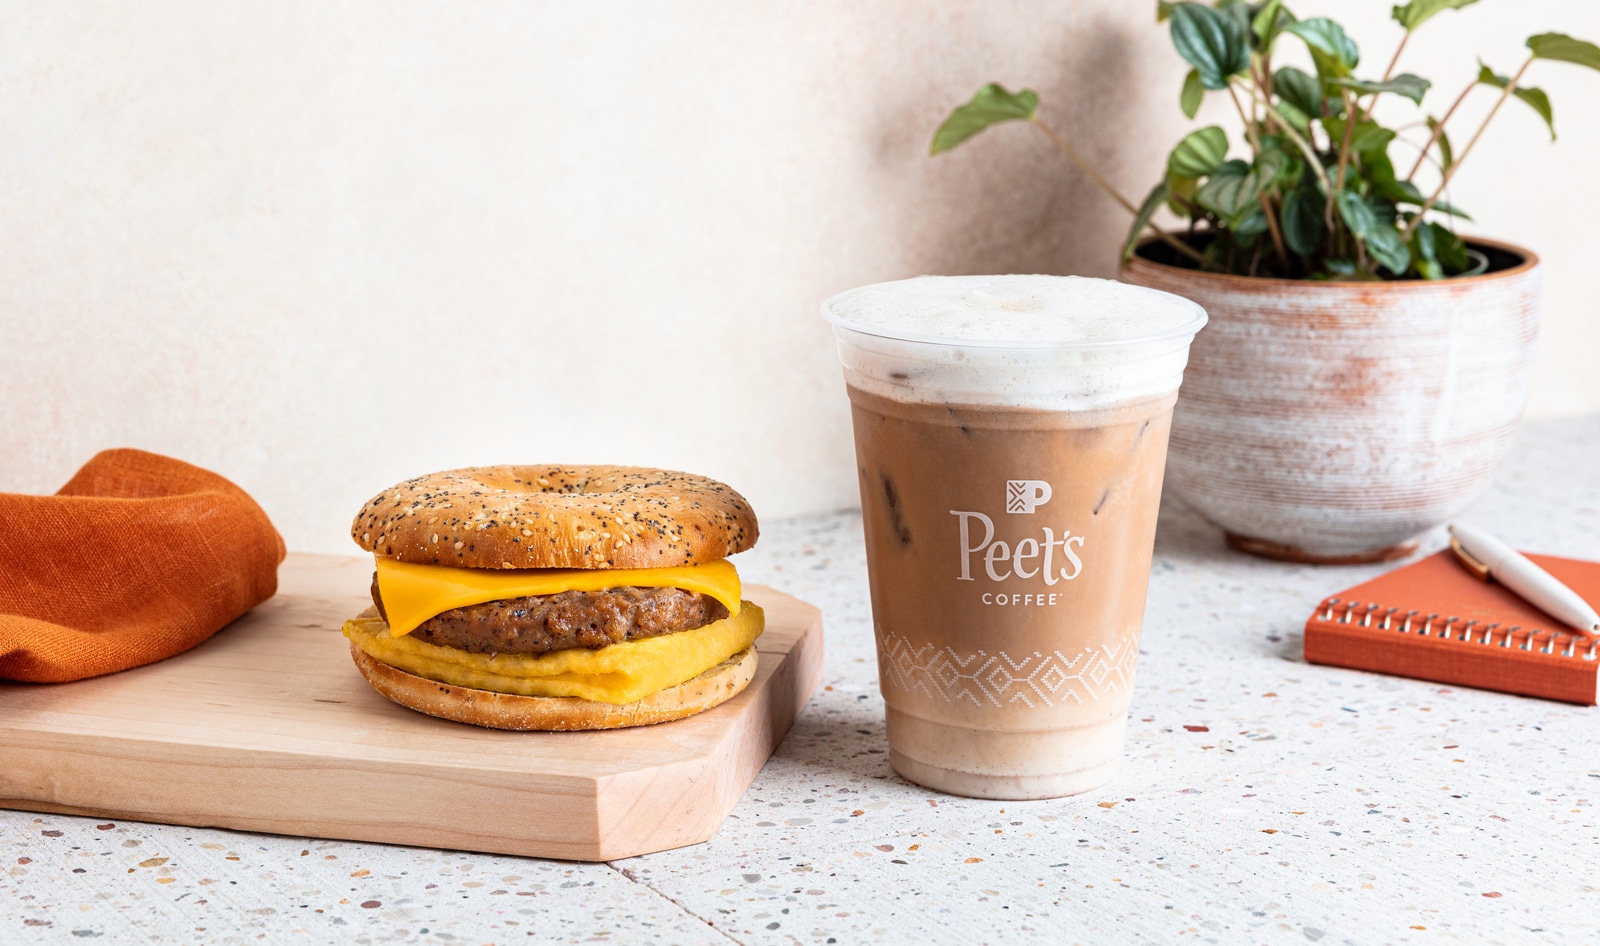 Peet’s Just Launched a Vegan Breakfast Sandwich With JUST Egg and Beyond Meat&nbsp;